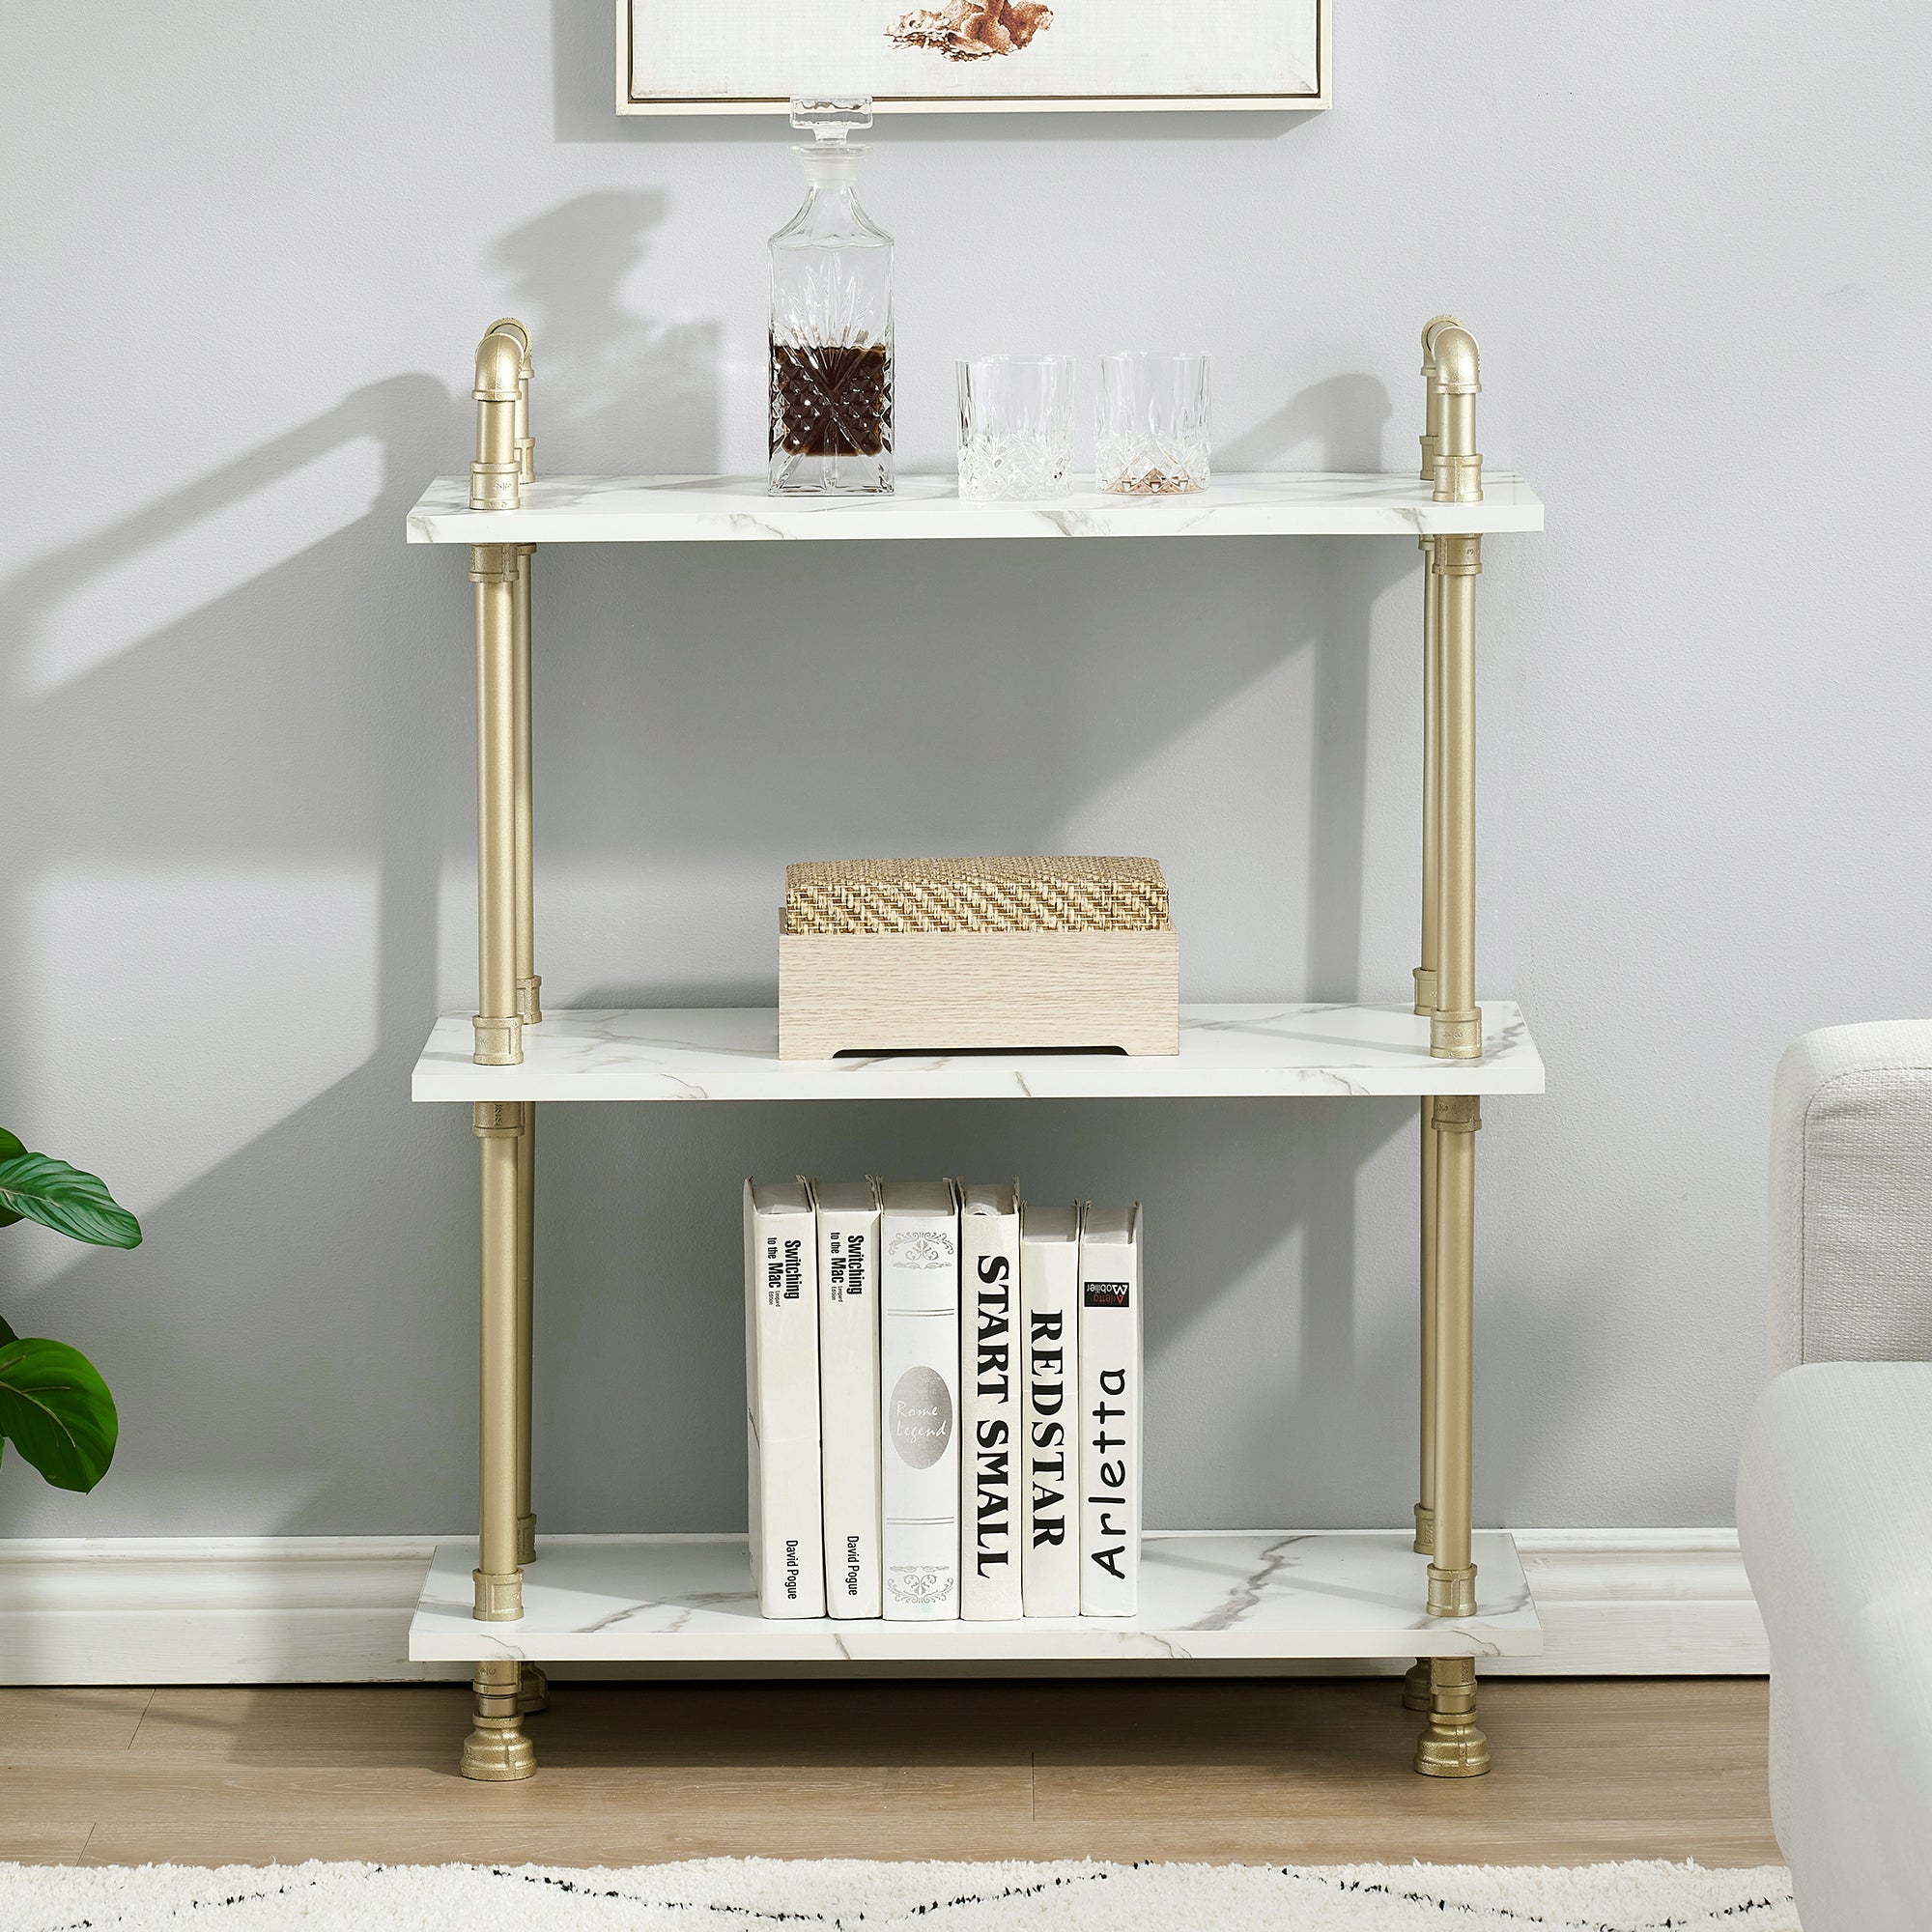 Ivinta Furniture White Bookshelf Small 3-Tier Kids Bookcase for Bedroom, Modern Industrial Book Shelf Leaning Bookcases Low Rustic Storage Shelf